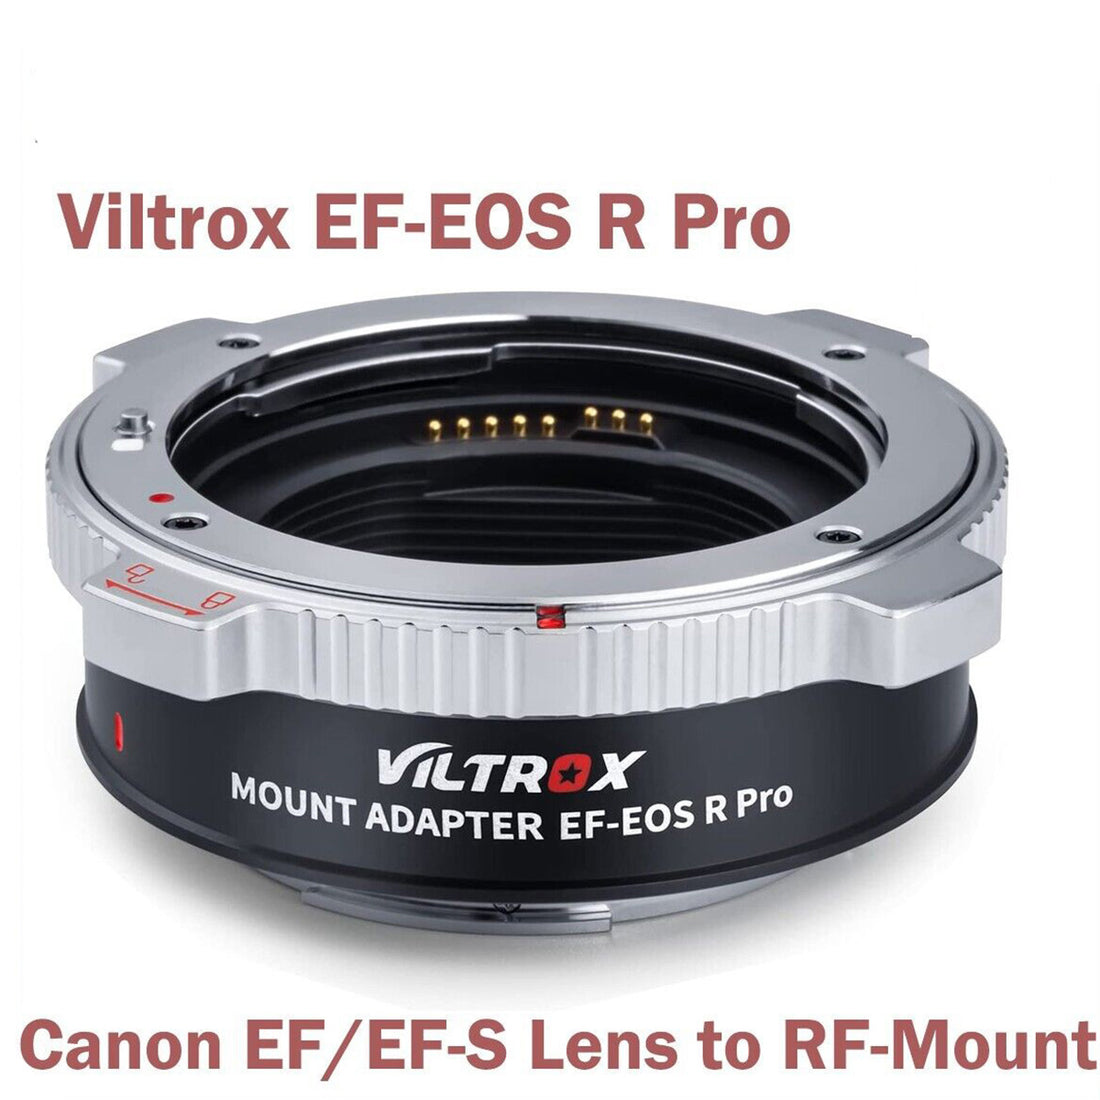 Viltrox PRO AF Adapter + Locking Ring for Canon E/EFs lens to EOS R Camera